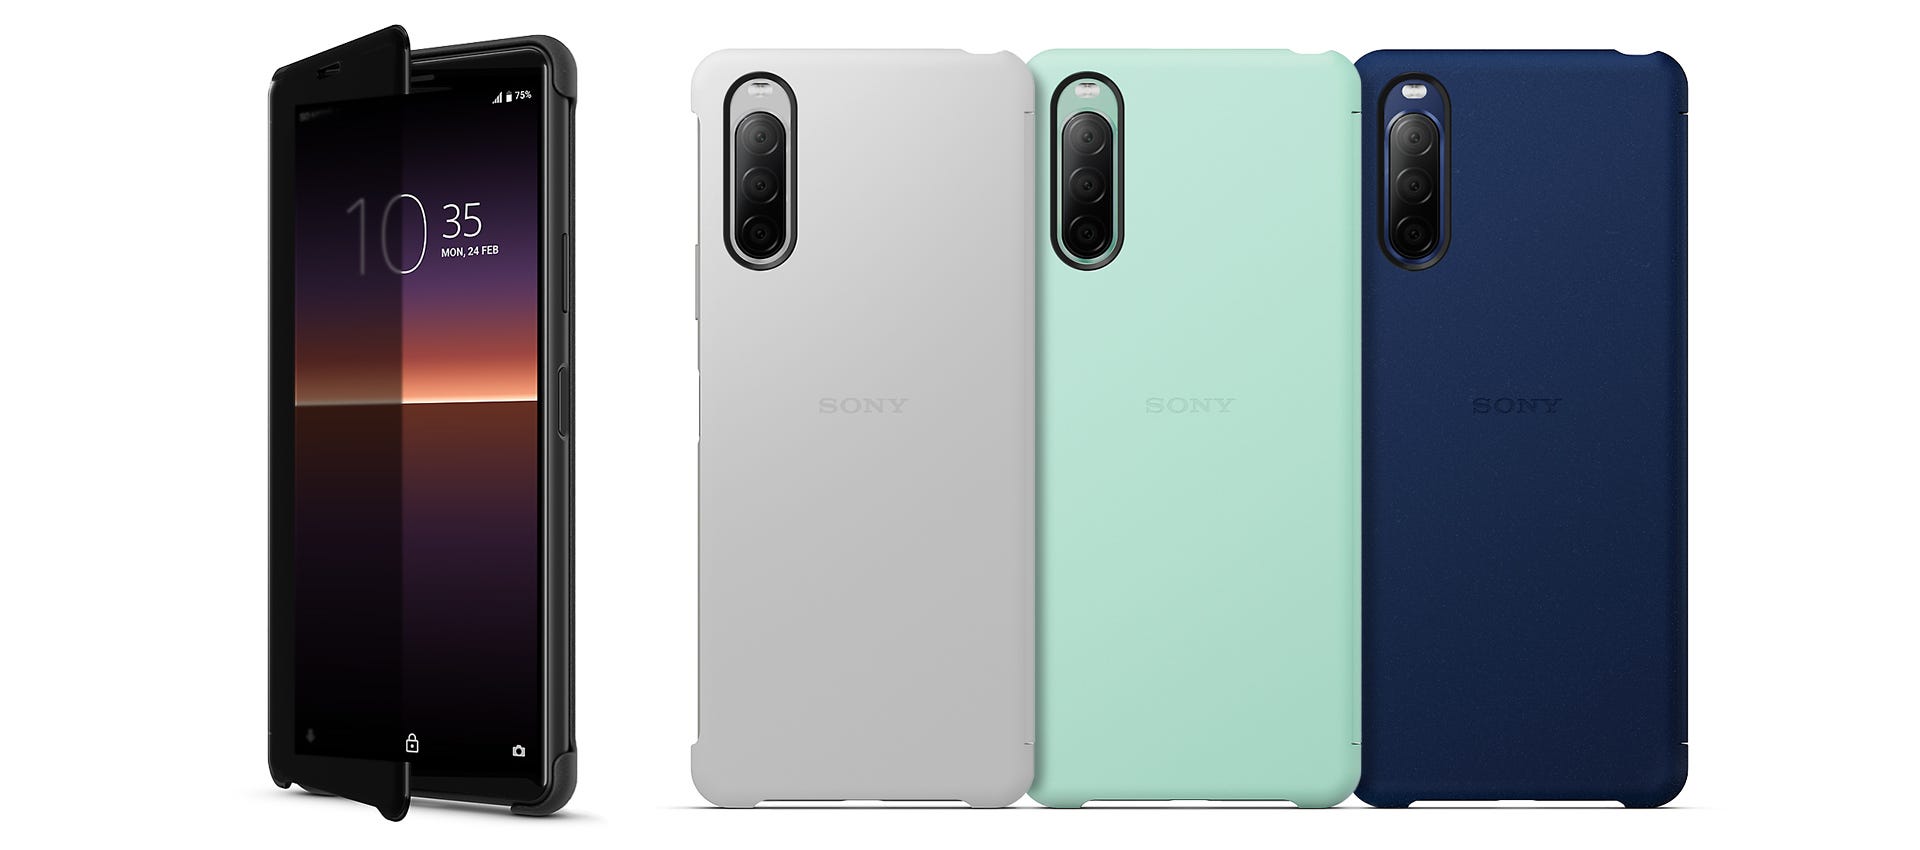 Style Cover View case for Xperia 1 II and Xperia 5 II announced | by Sohrab  Osati | Sony Reconsidered